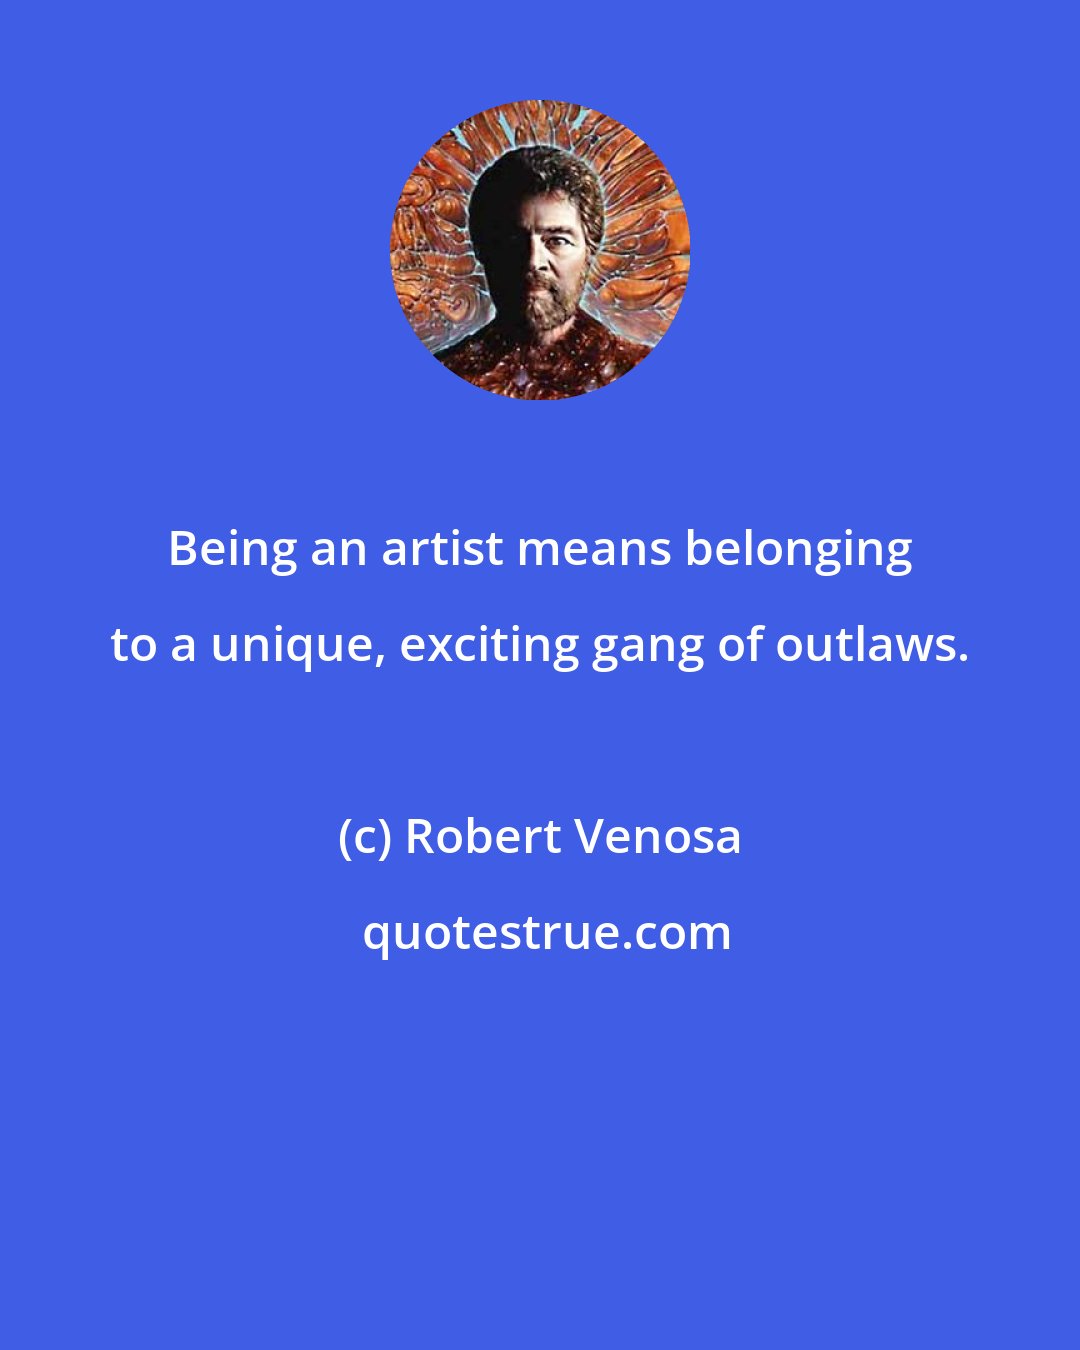 Robert Venosa: Being an artist means belonging to a unique, exciting gang of outlaws.